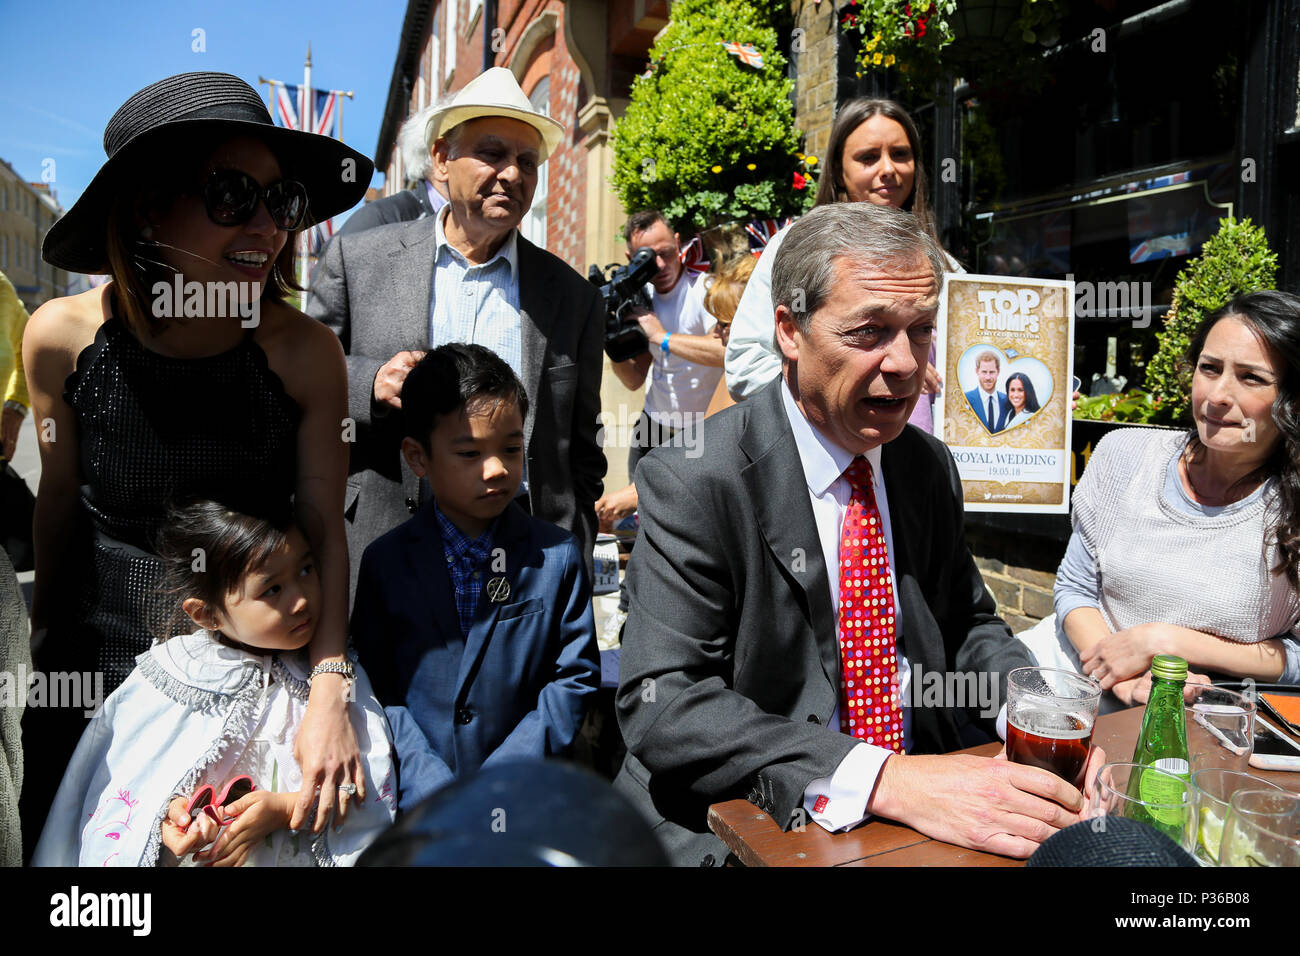 Nigel Farage meets Royal fans from UK and around the world in Windsor ahead of the wedding of Prince Harry and Meghan Markle on Saturday 19 May 2018.  Featuring: Nigel Farage, Christina Araneta-Tan, Lucas (7 yrs old), Sienna (5 yrs old) Where: Windsor, United Kingdom When: 17 May 2018 Credit: Dinendra Haria/WENN Stock Photo